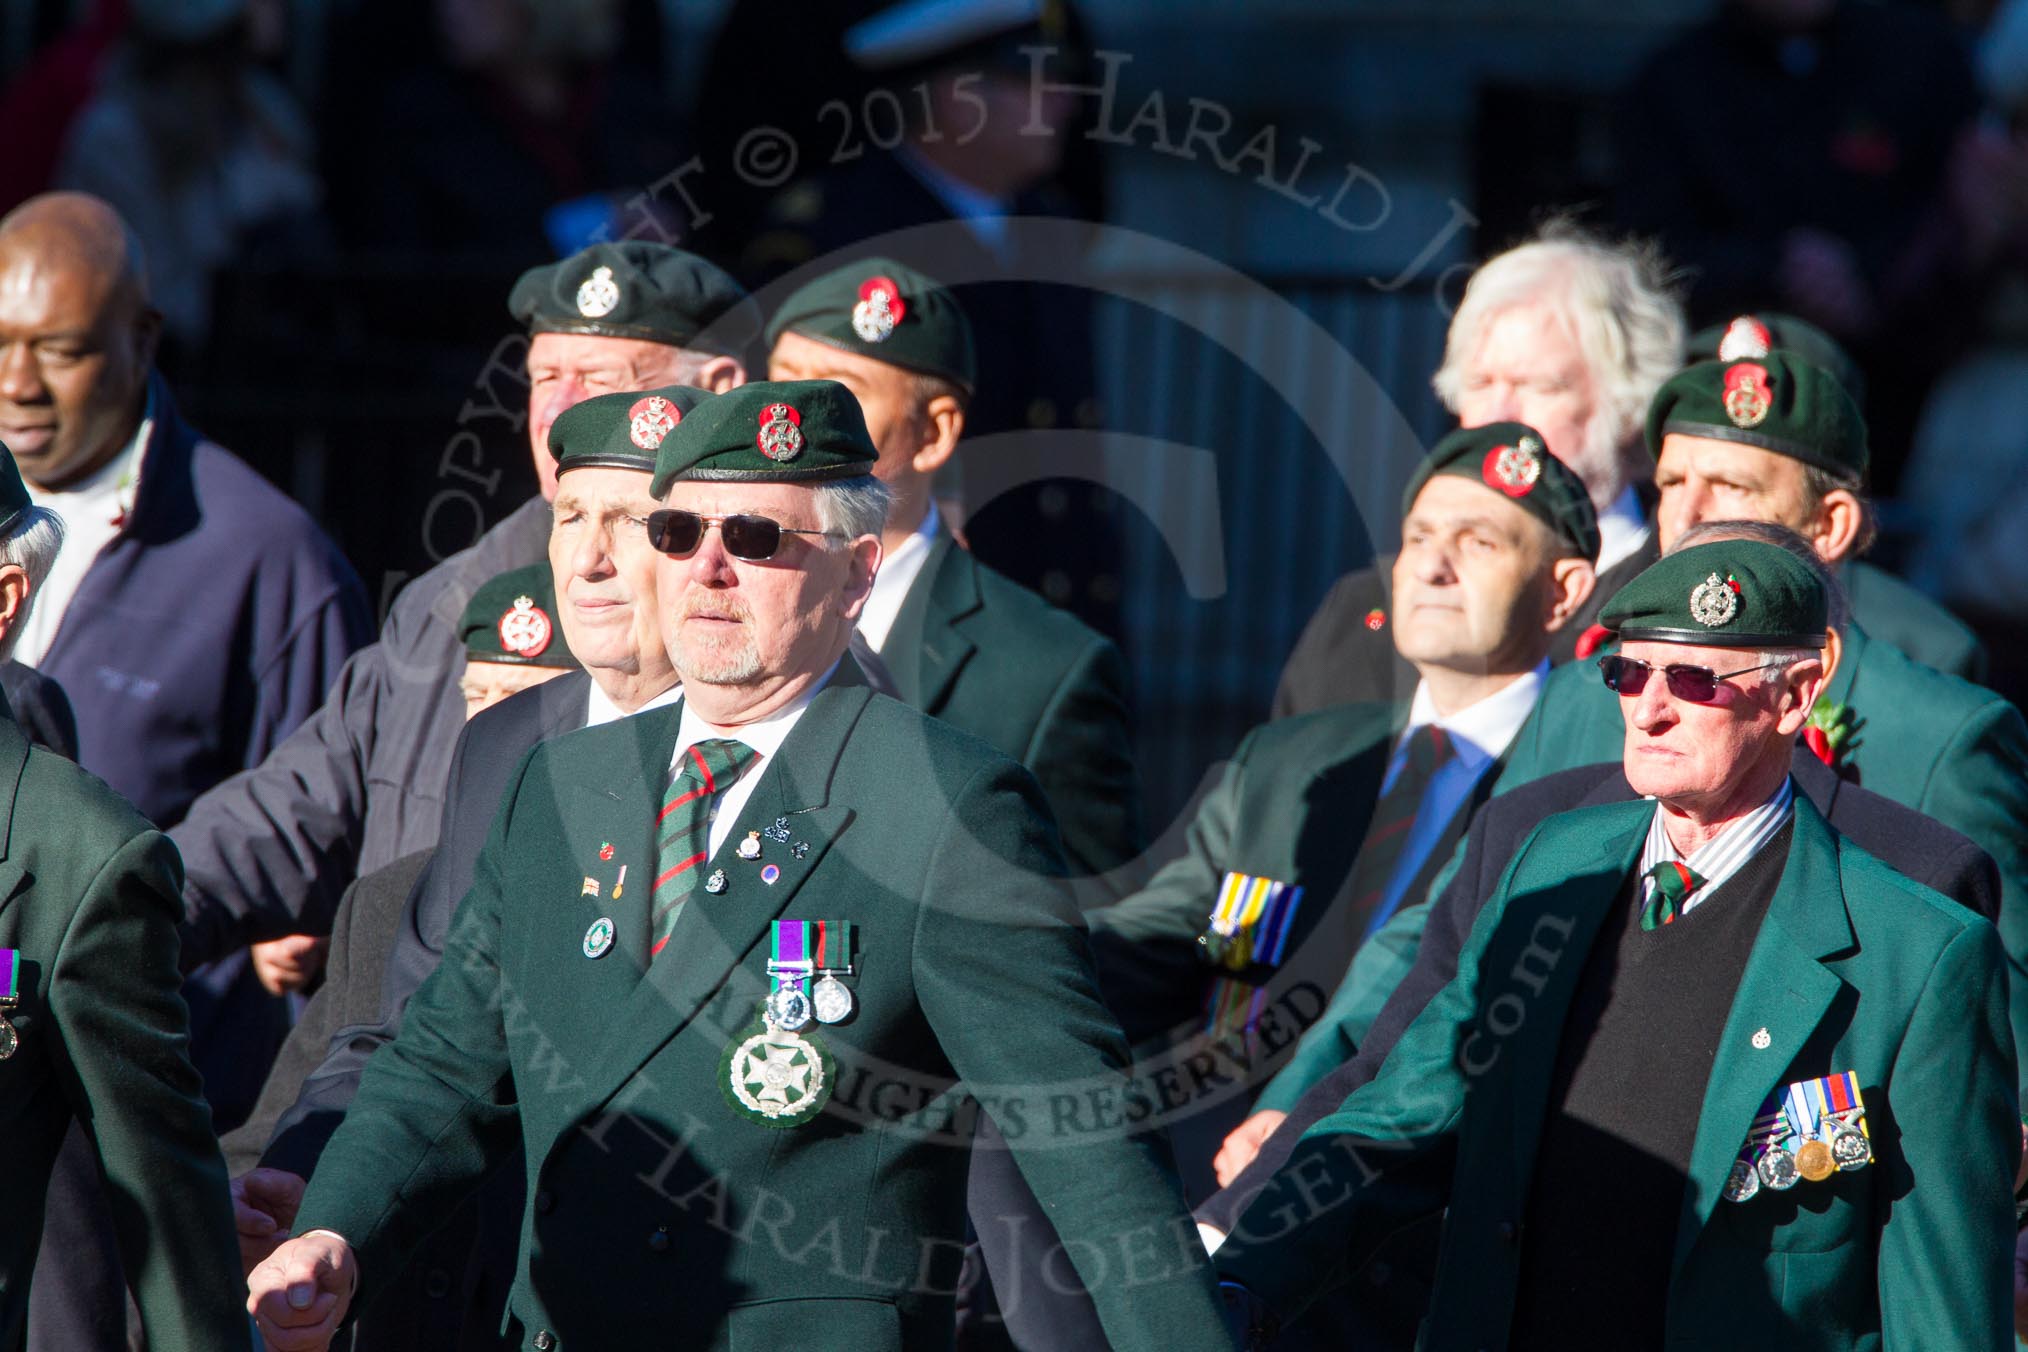 Remembrance Sunday Cenotaph March Past 2013: A16 - Royal Green Jackets Association..
Press stand opposite the Foreign Office building, Whitehall, London SW1,
London,
Greater London,
United Kingdom,
on 10 November 2013 at 11:56, image #1131